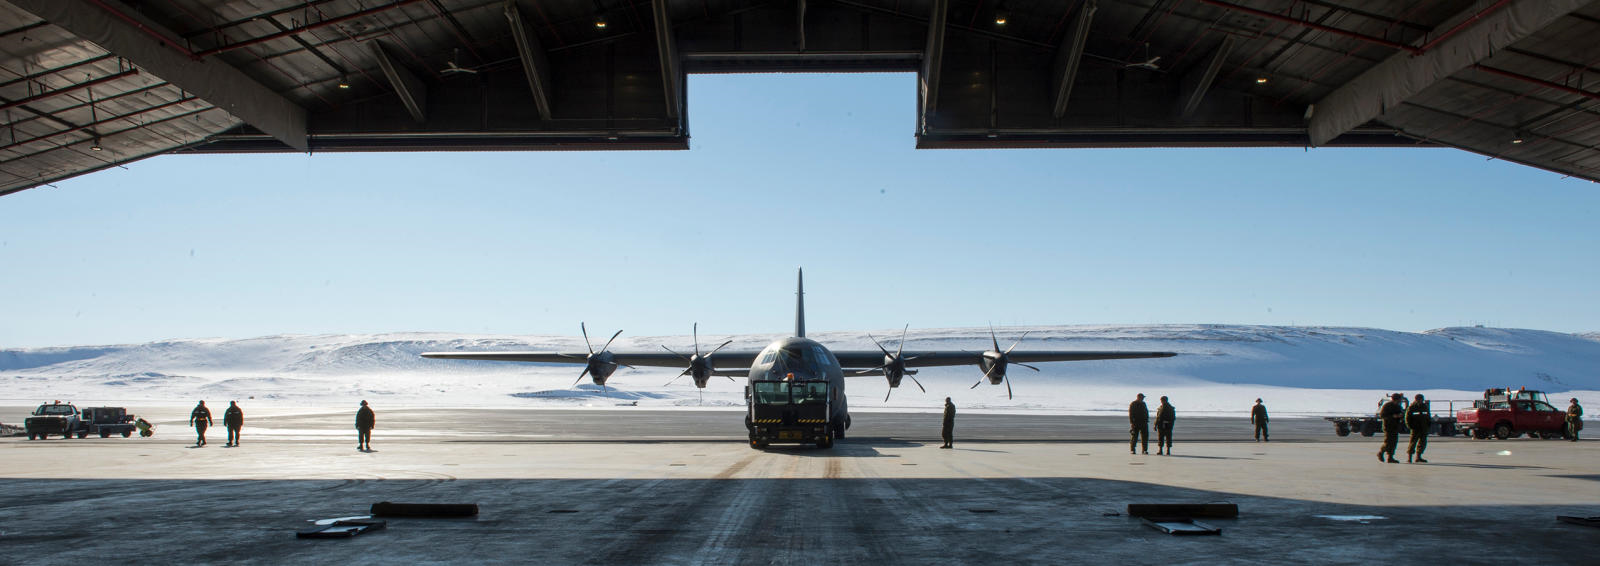 A CC-130 Hercules aircraft is towed into the hangar in Thule, Greenland during Operation BOXTOP on April 24, 2017. (Photo: Corporal Audrey Solomon, 8 Wing Imaging)